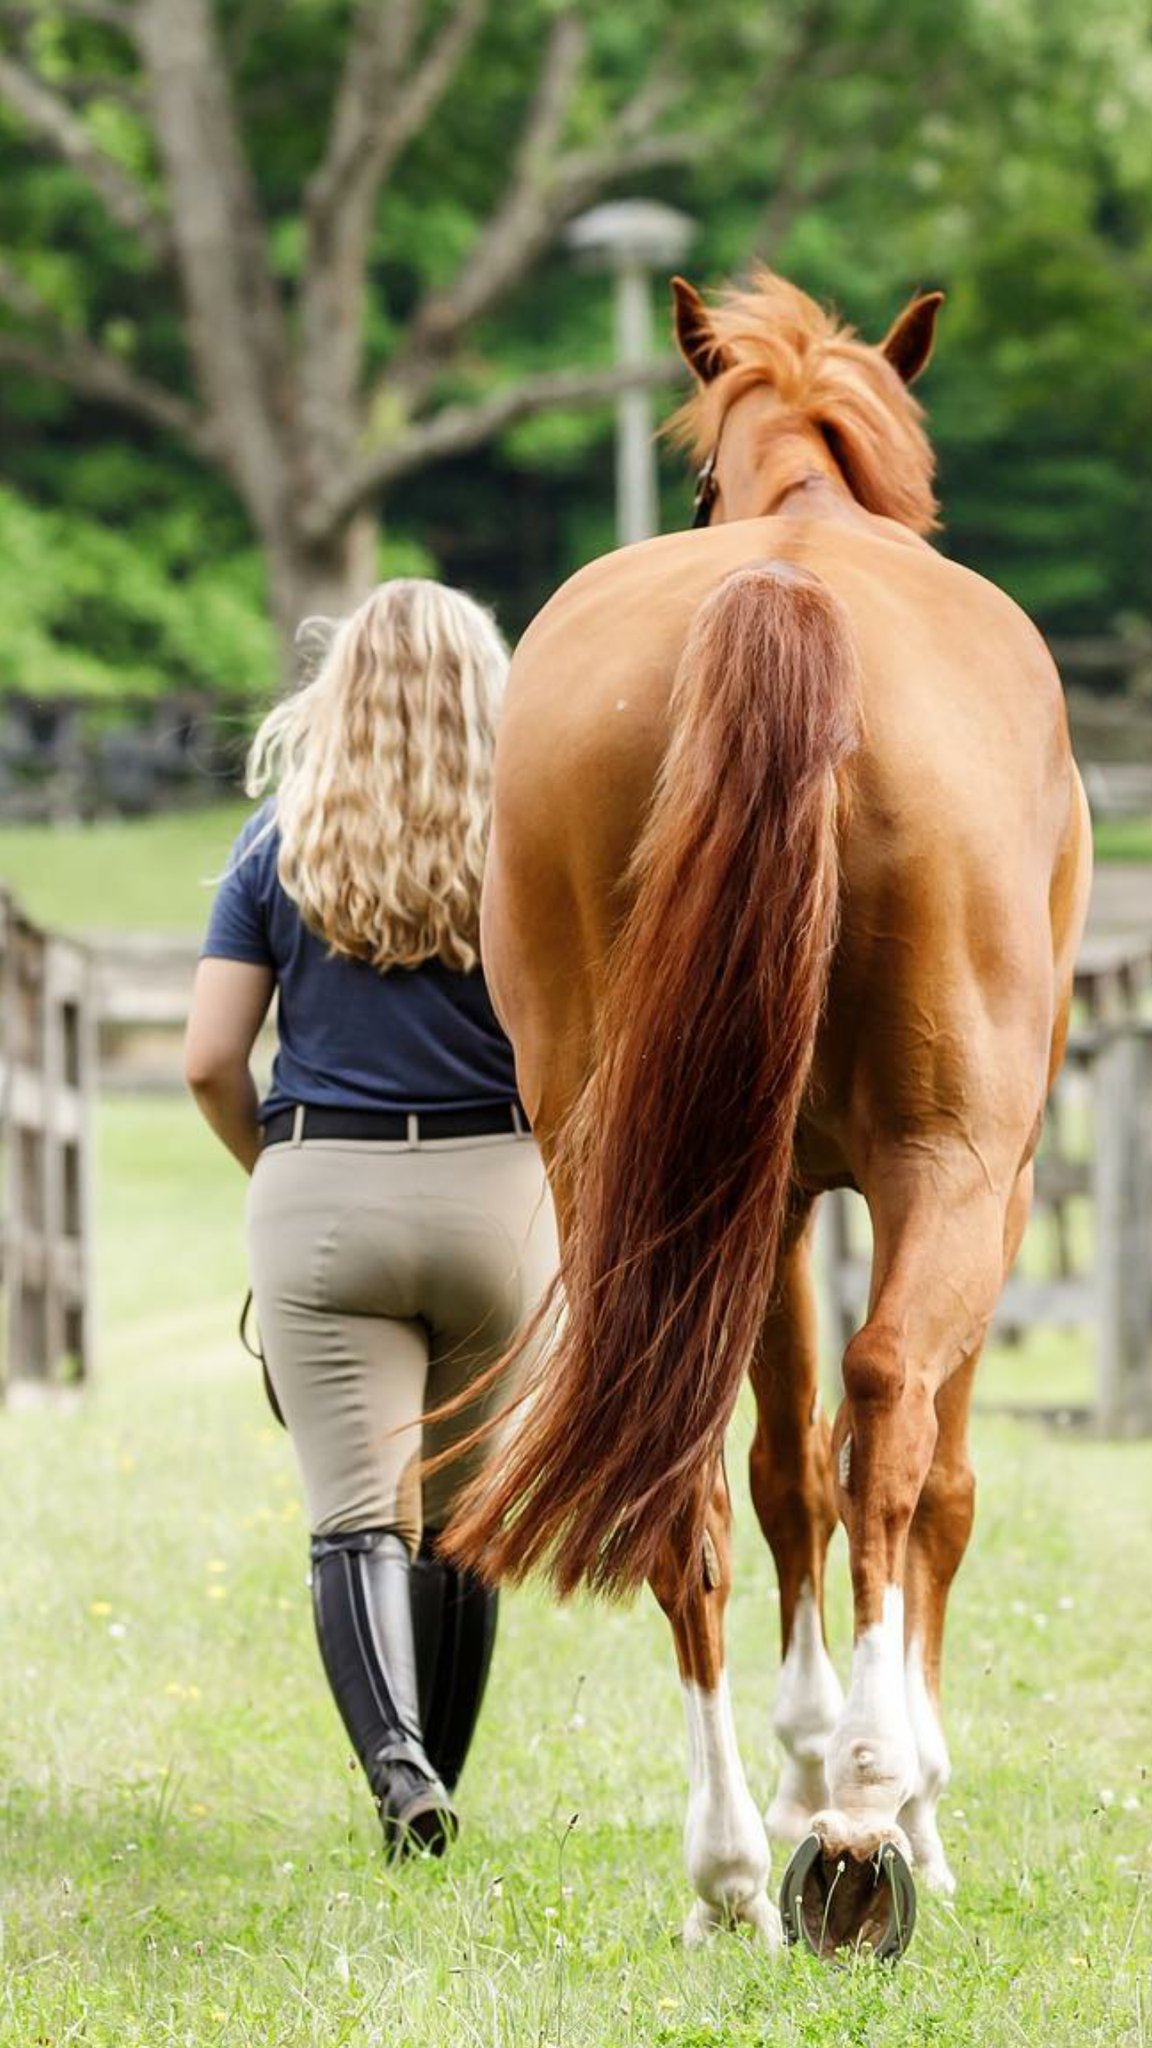 Either Holding or Leading a Horse 26185-either-holding-or-leading-a-horse.jpg